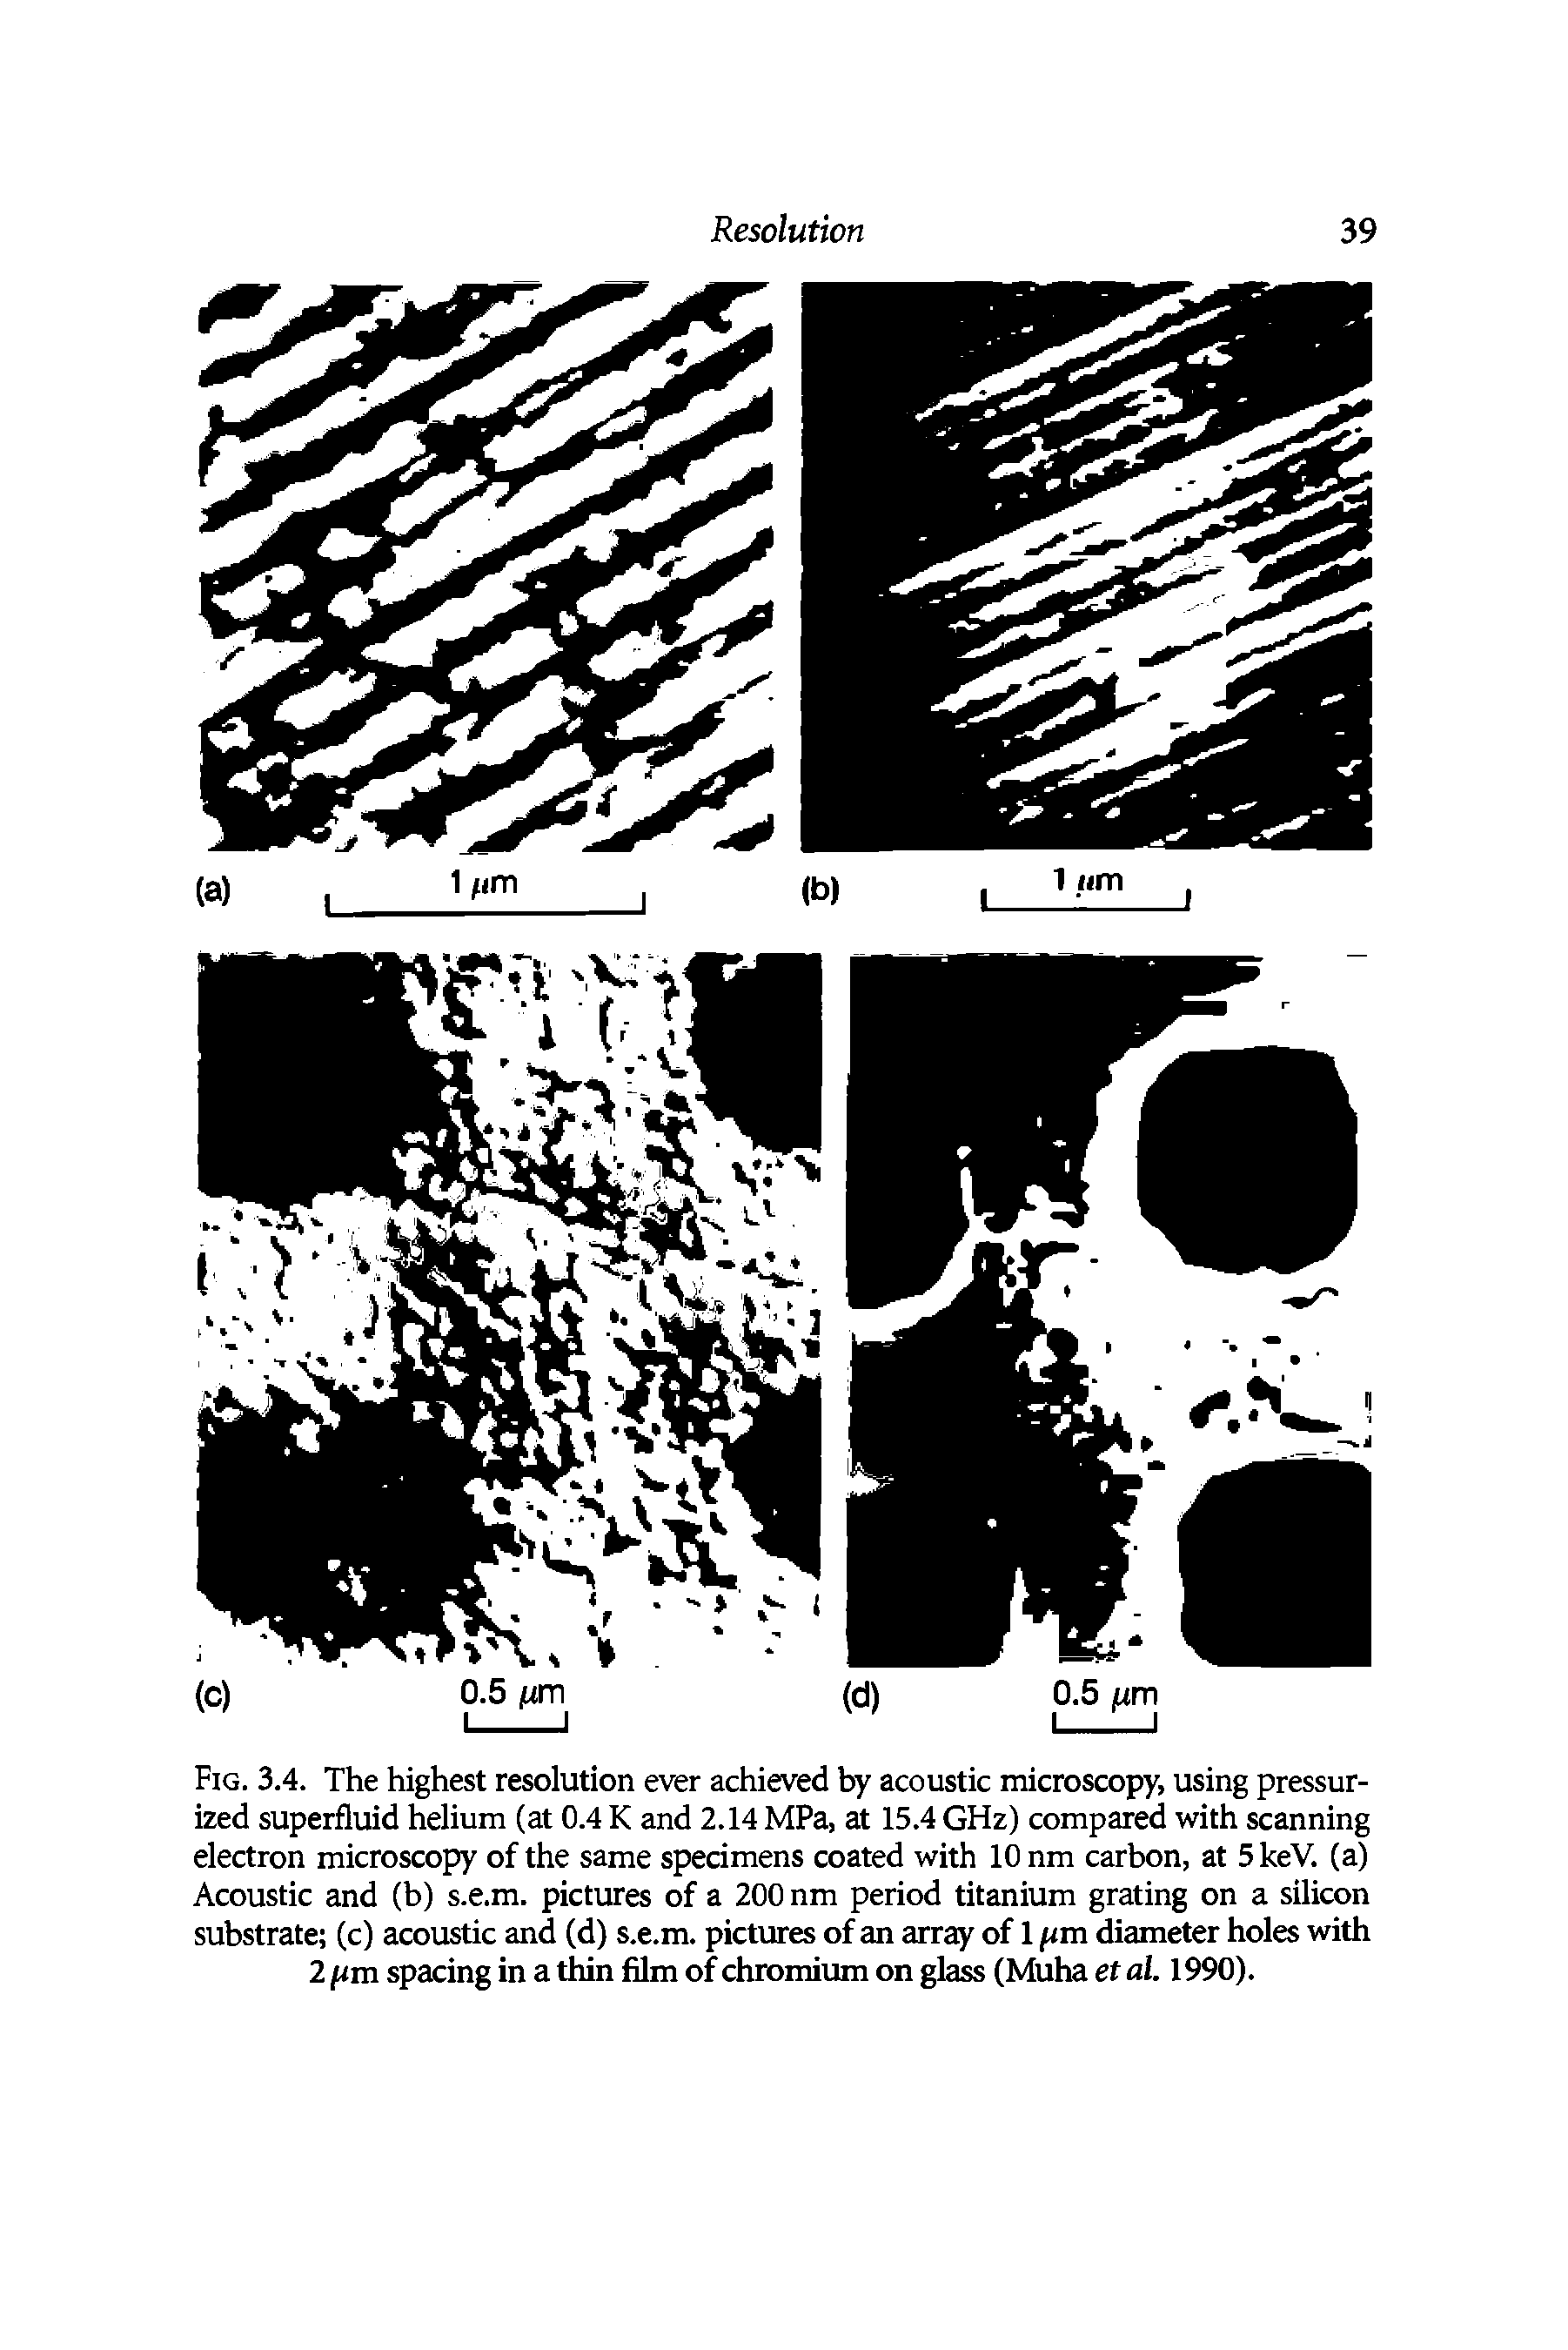 Fig. 3.4. The highest resolution ever achieved by acoustic microscopy, using pressurized superfluid helium (at 0.4 K and 2.14 MPa, at 15.4 GHz) compared with scanning electron microscopy of the same specimens coated with 10 nm carbon, at 5 keV. (a) Acoustic and (b) s.e.m. pictures of a 200 nm period titanium grating on a silicon substrate (c) acoustic and (d) s.e.m. pictures of an array of 1 [im diameter holes with 2 pm spacing in a thin film of chromium on glass (Muha et al. 1990).